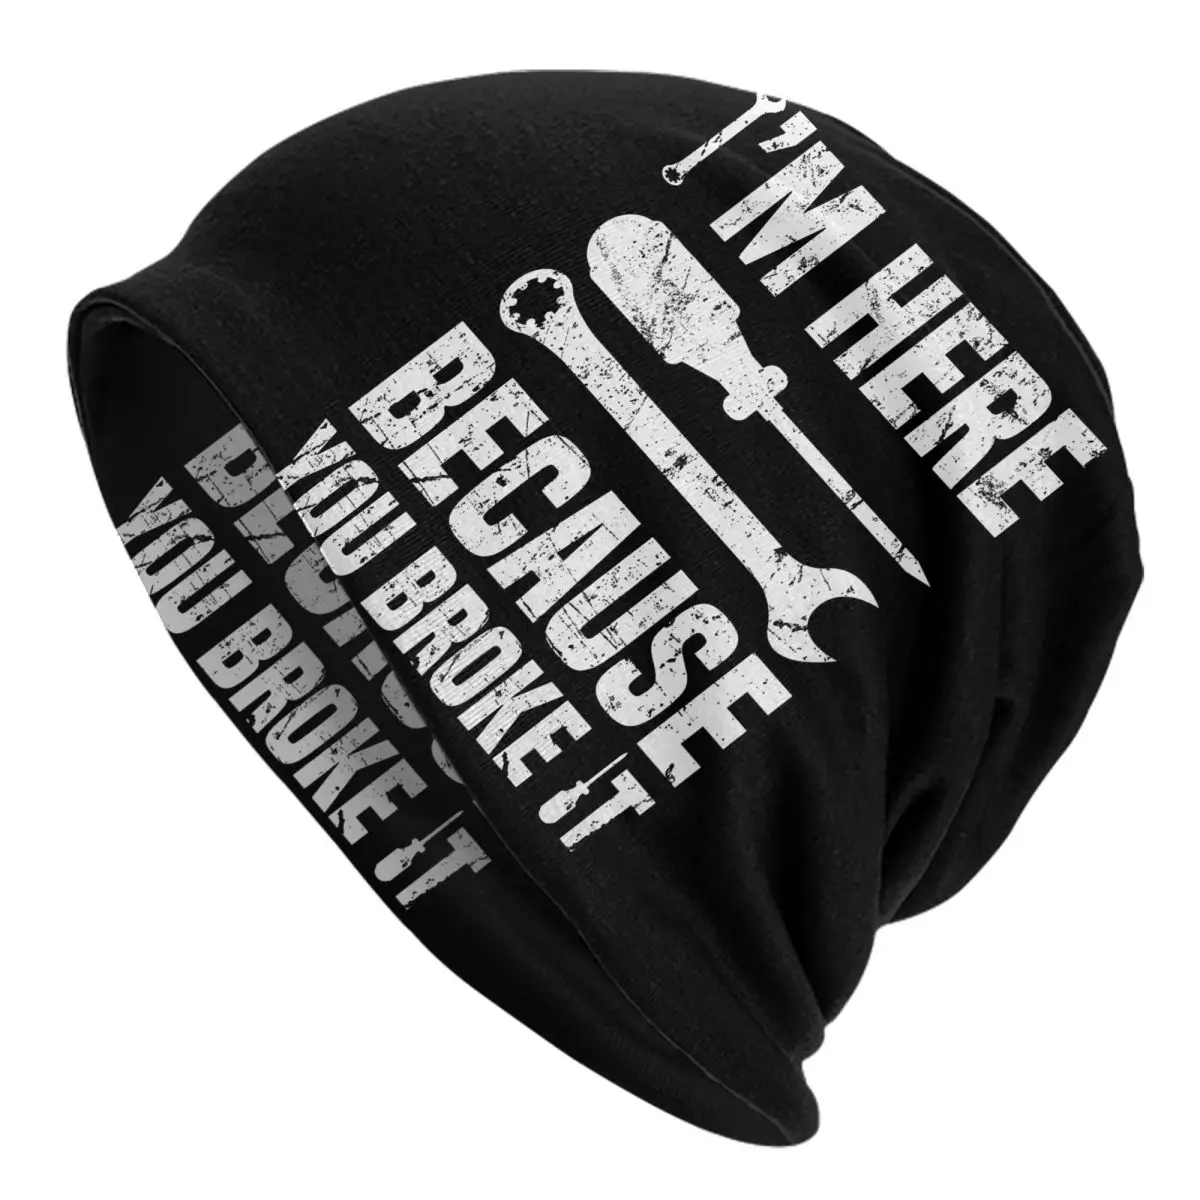 Funny Mechanic Car Auto Apparel Adult Men's Women's Knit Hat Keep warm winter Funny knitted hat